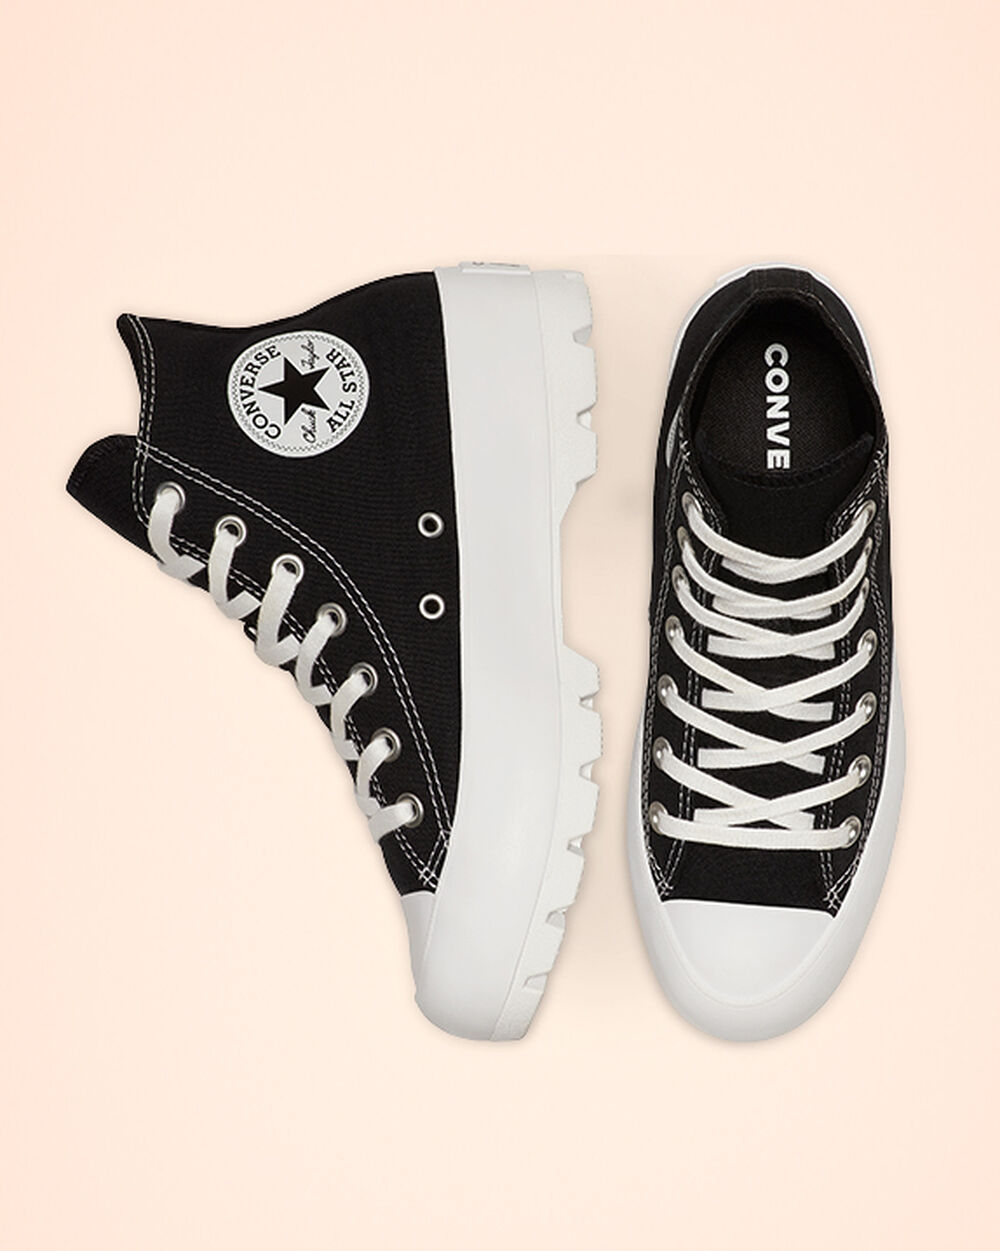 Tenis Converse Chuck Taylor All Star Lugged Mujer Negros Blancos Negros | Mexico-827666